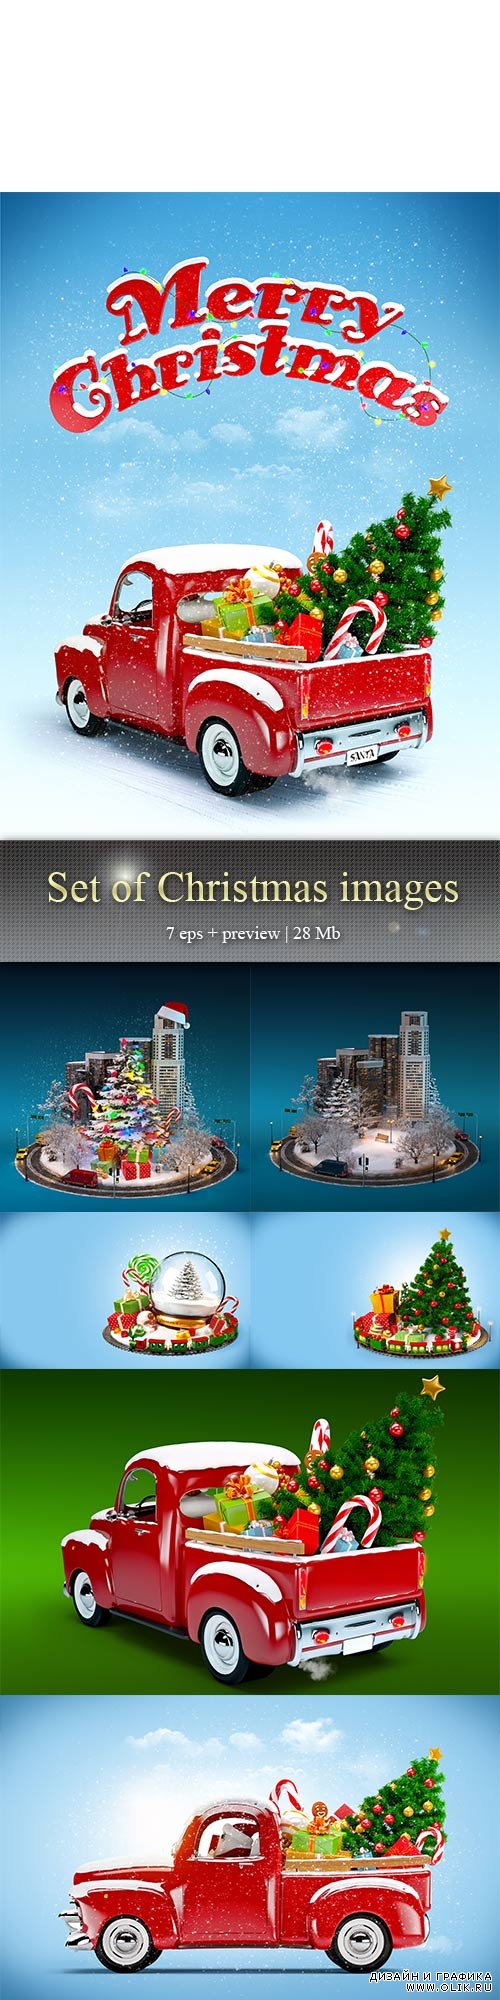 Set of Christmas images